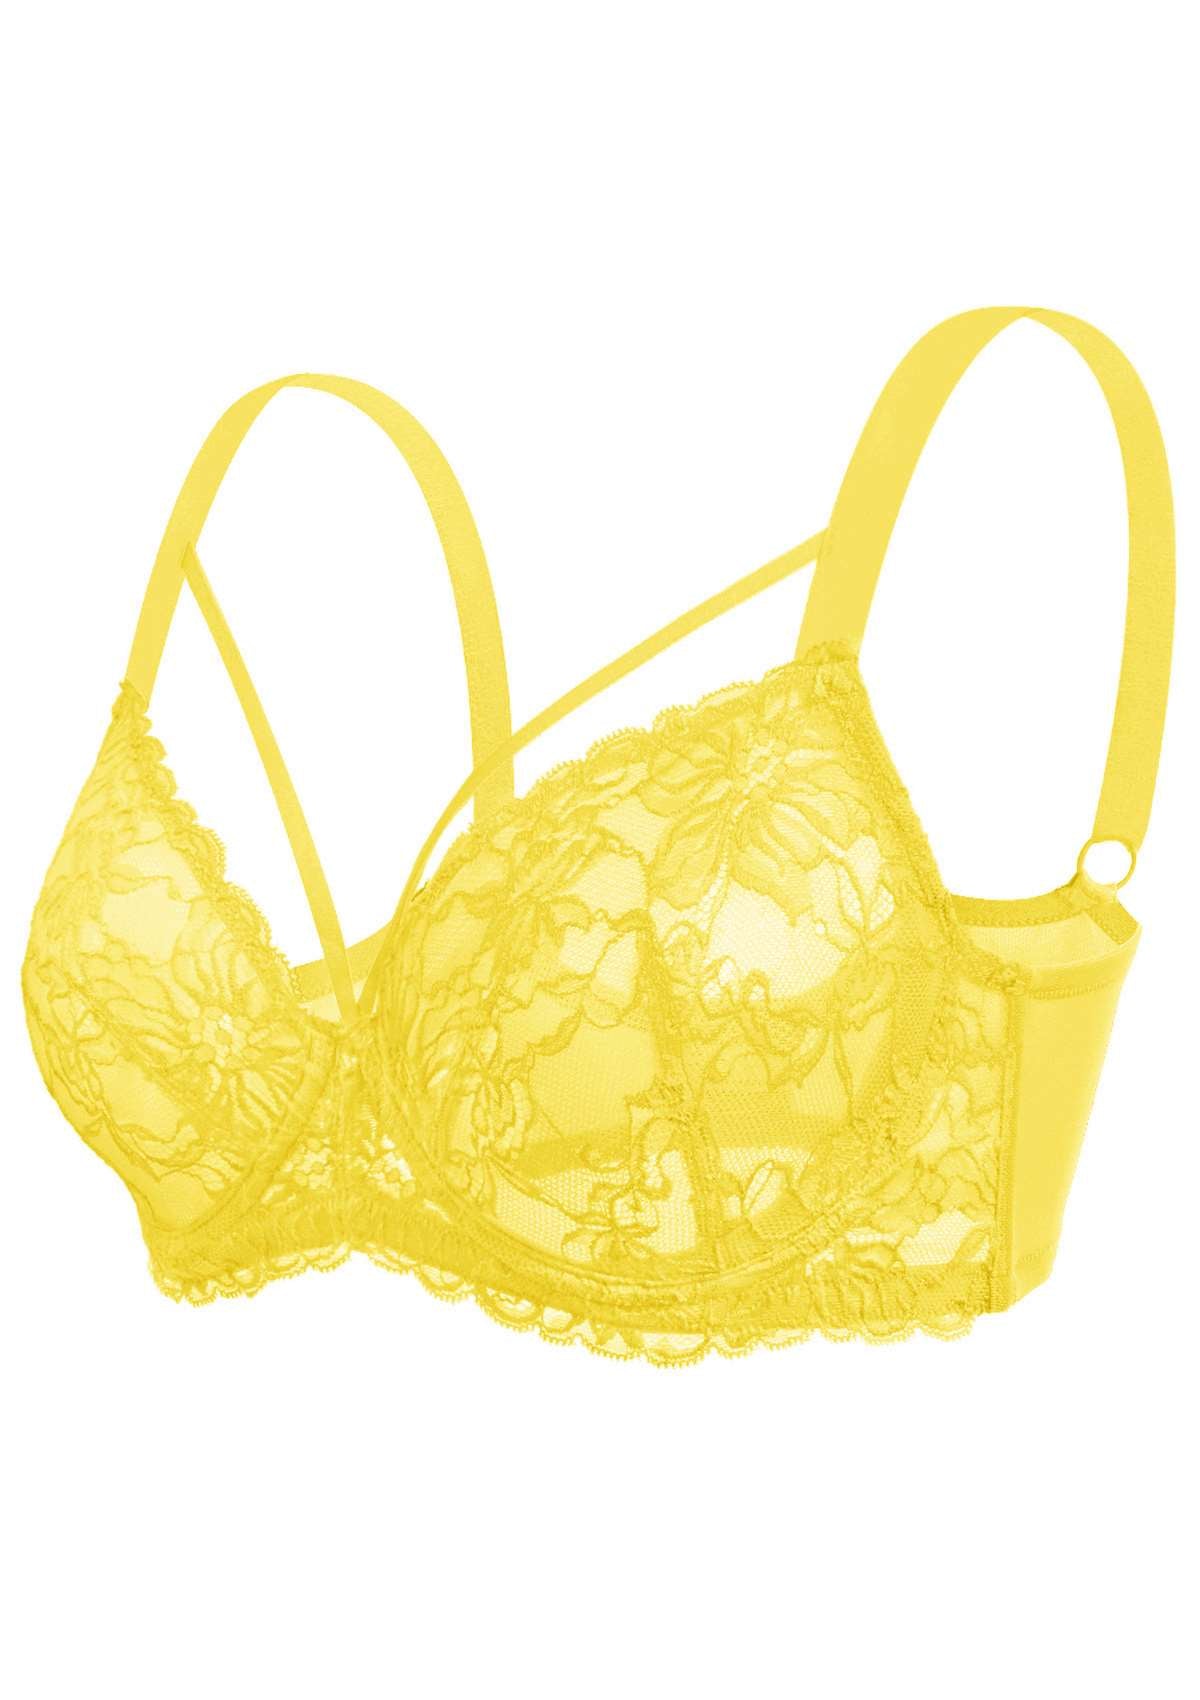 HSIA Unlined Lace Mesh Minimizer Bra For Large Breasts, Full Coverage - Bright Green / 36 / DD/E